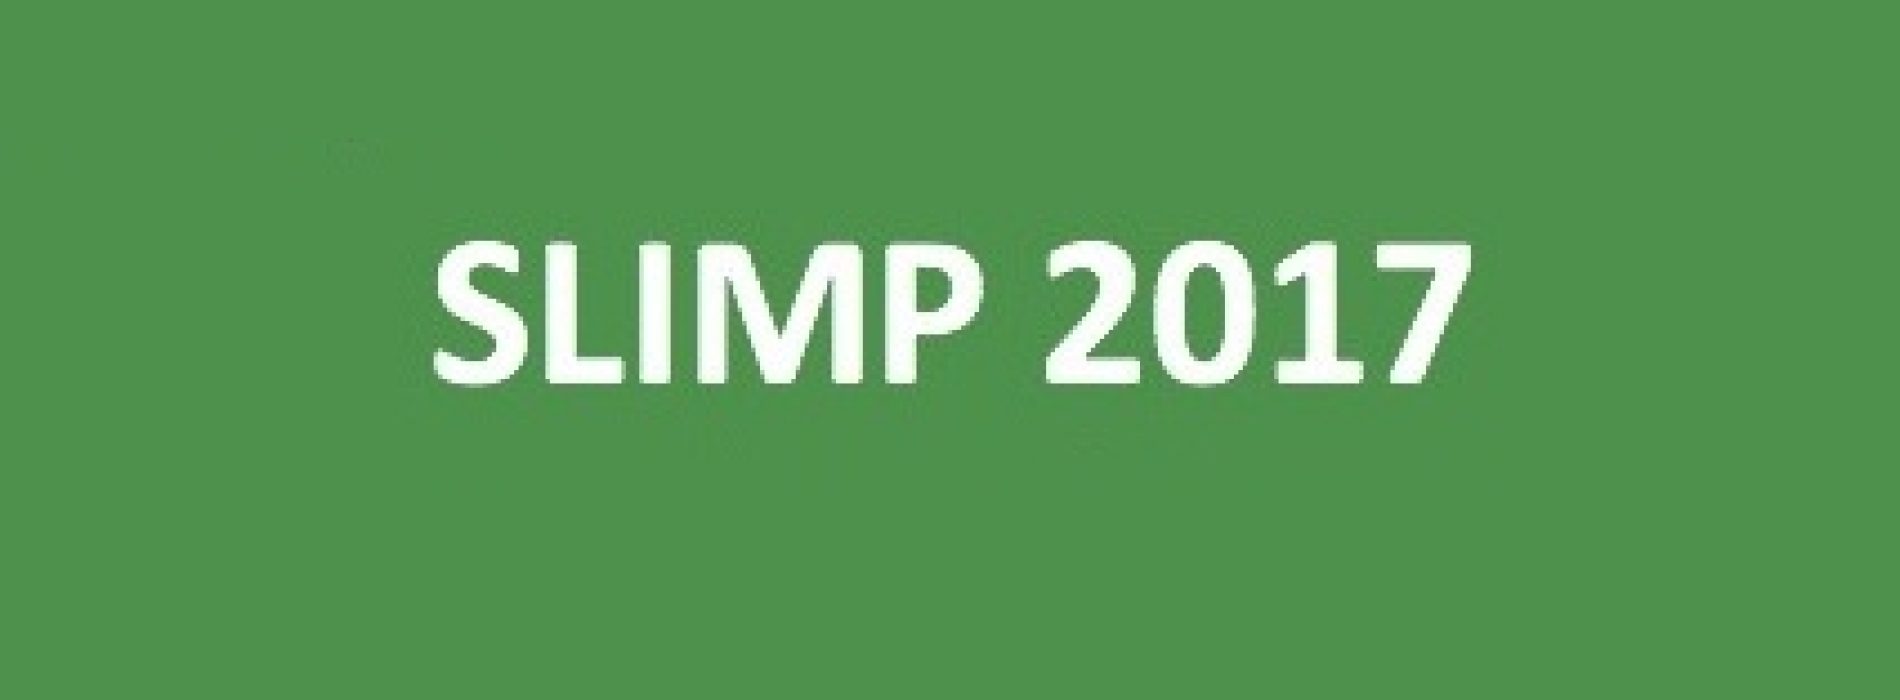 SLIMP 2017 SCHCF joint meeting CHILE